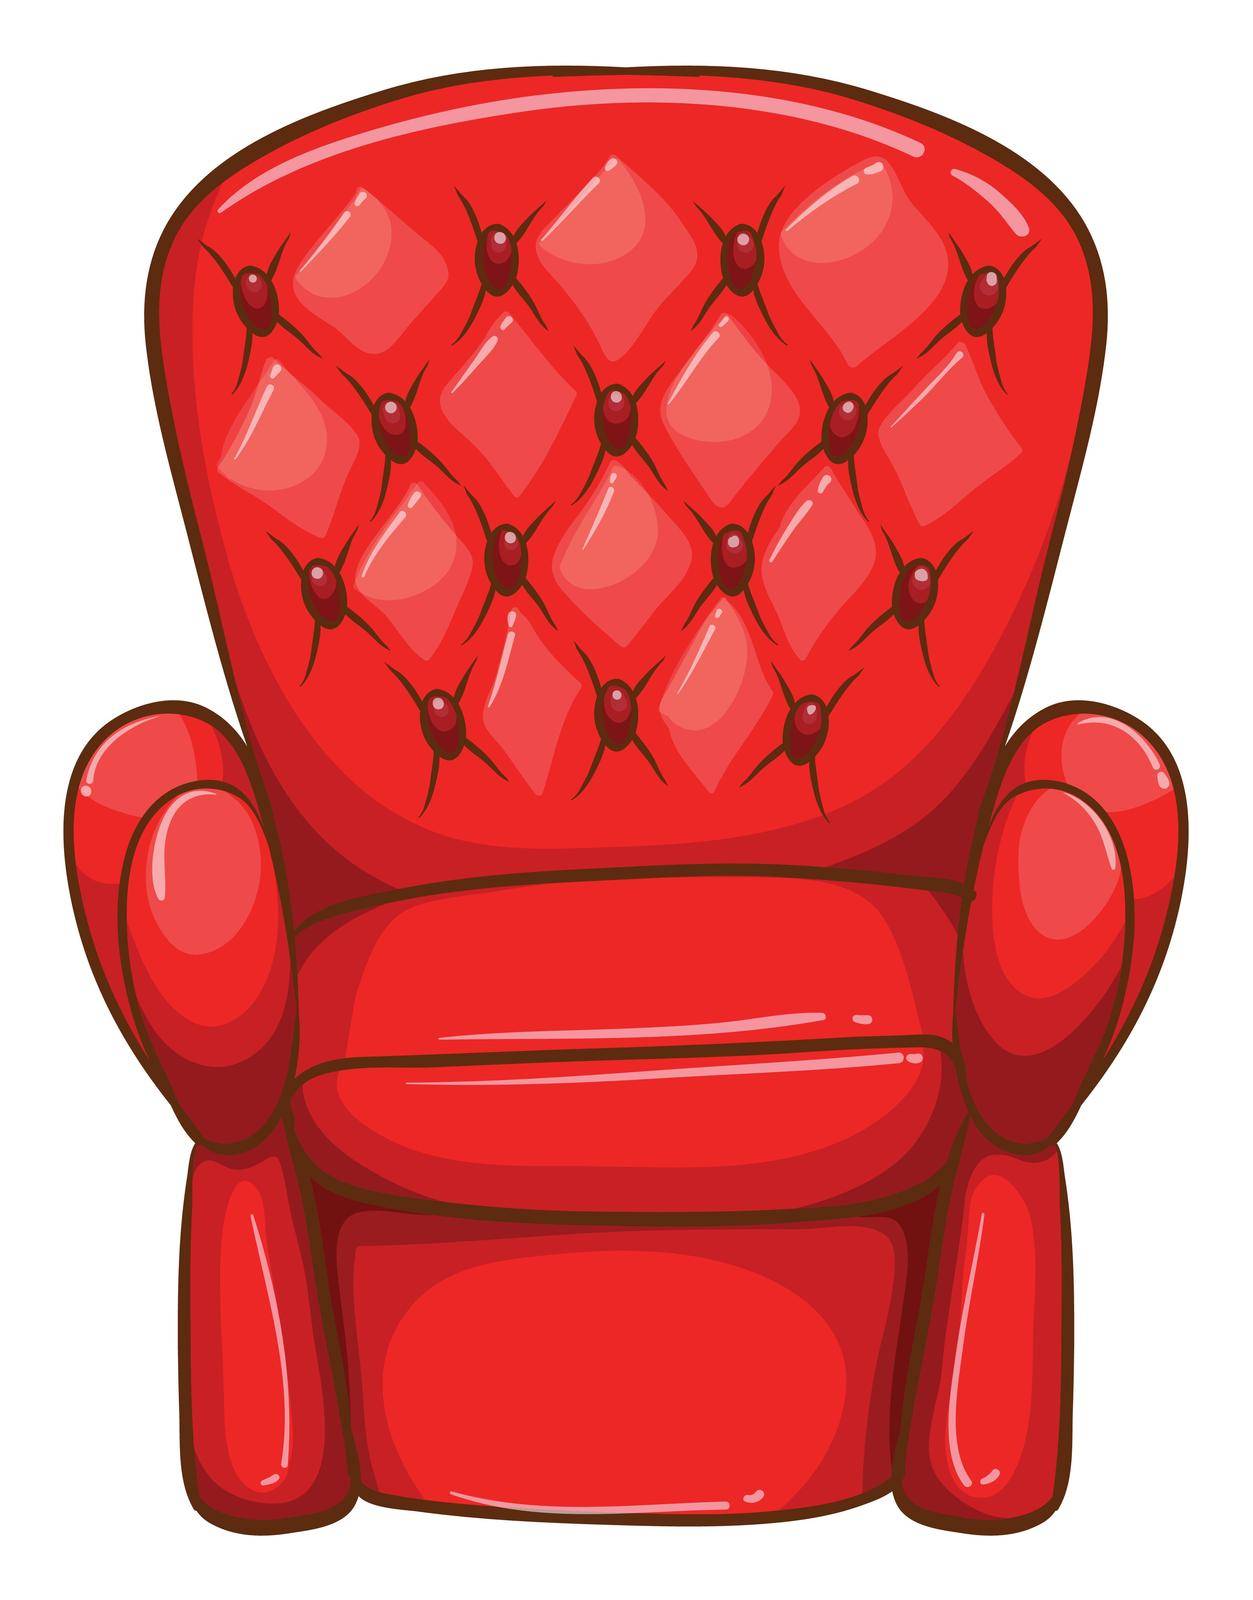 A simple drawing of a red chair by iimages